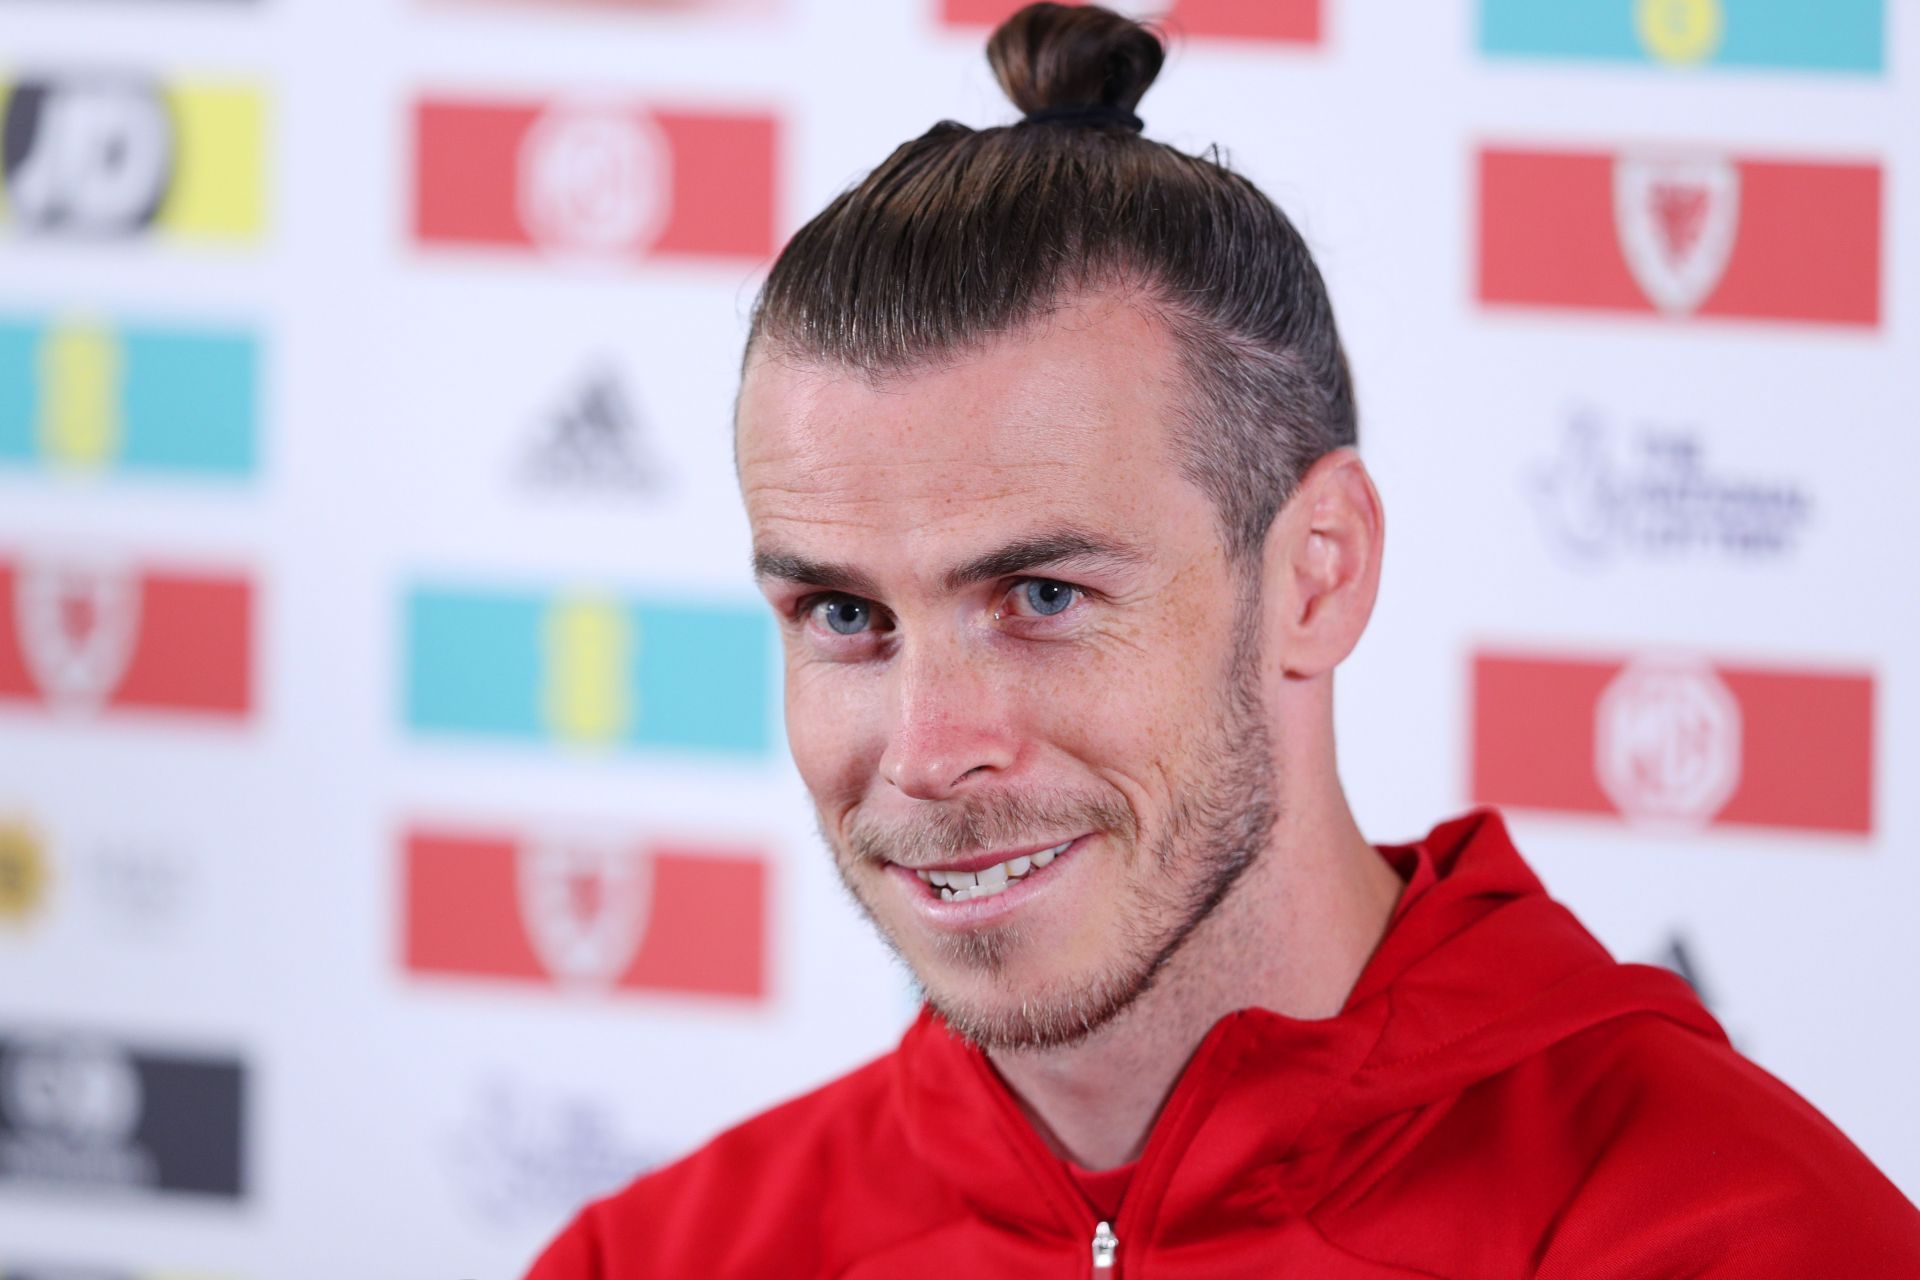 Gareth Bale is looking forward to playing in the 2022 World Cup.